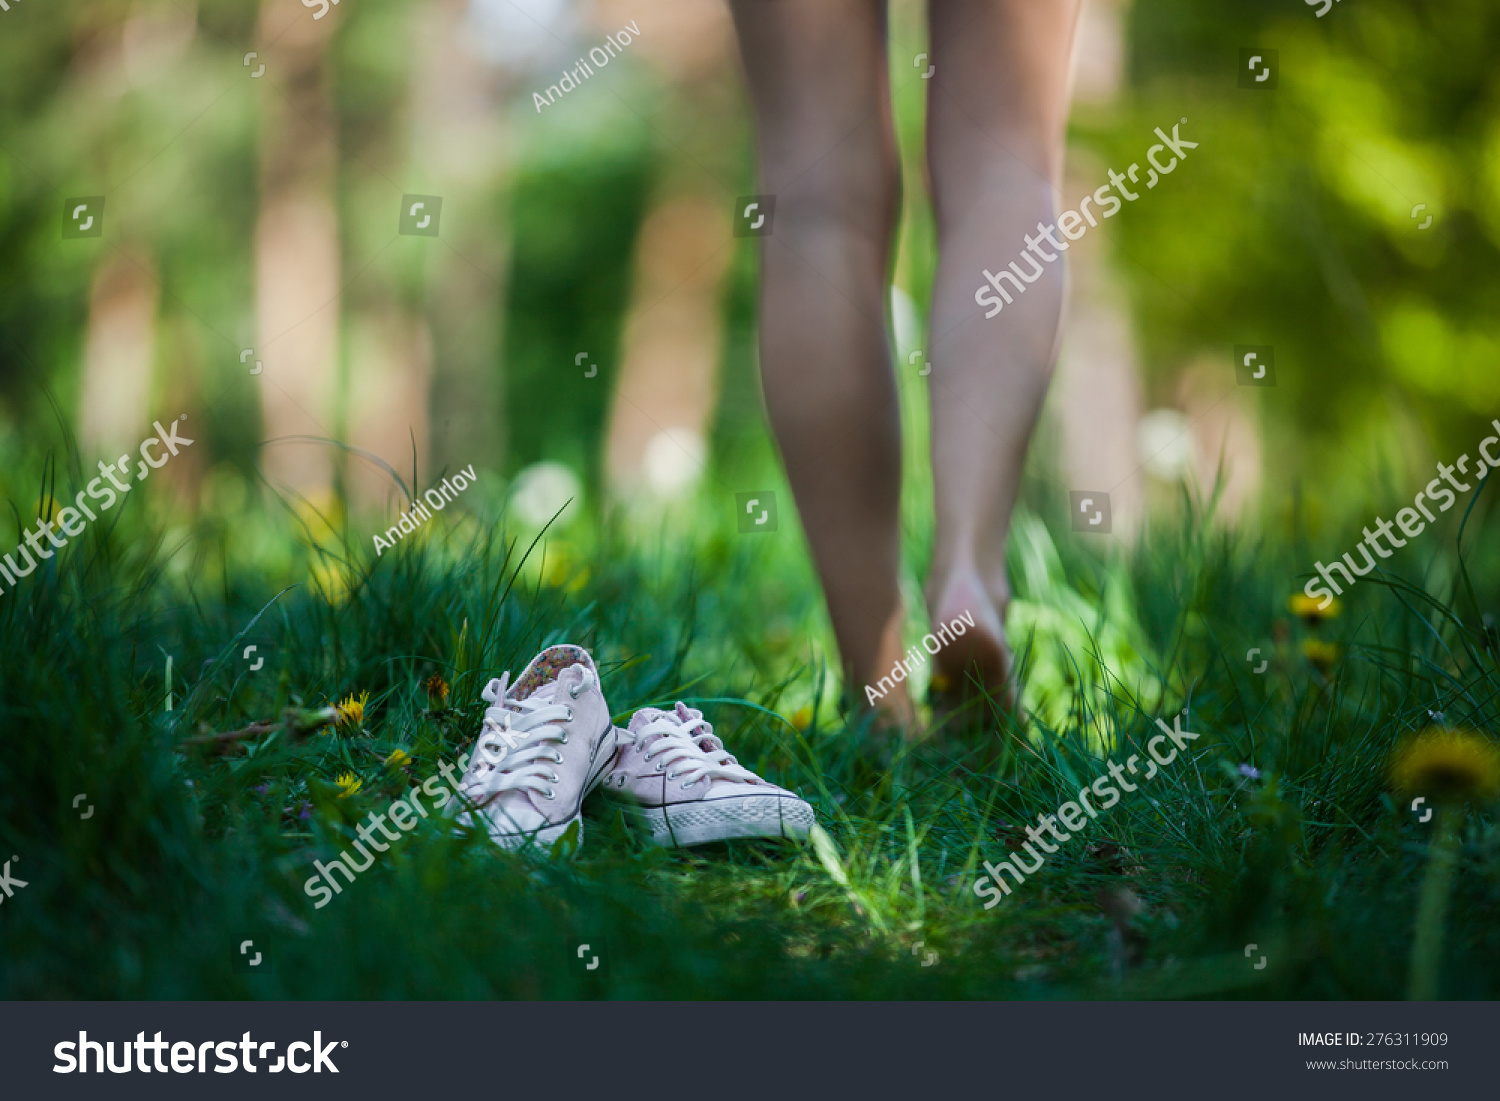 Woman walking barefoot on the green grass, shoes in focus, shallow DOF #276311909